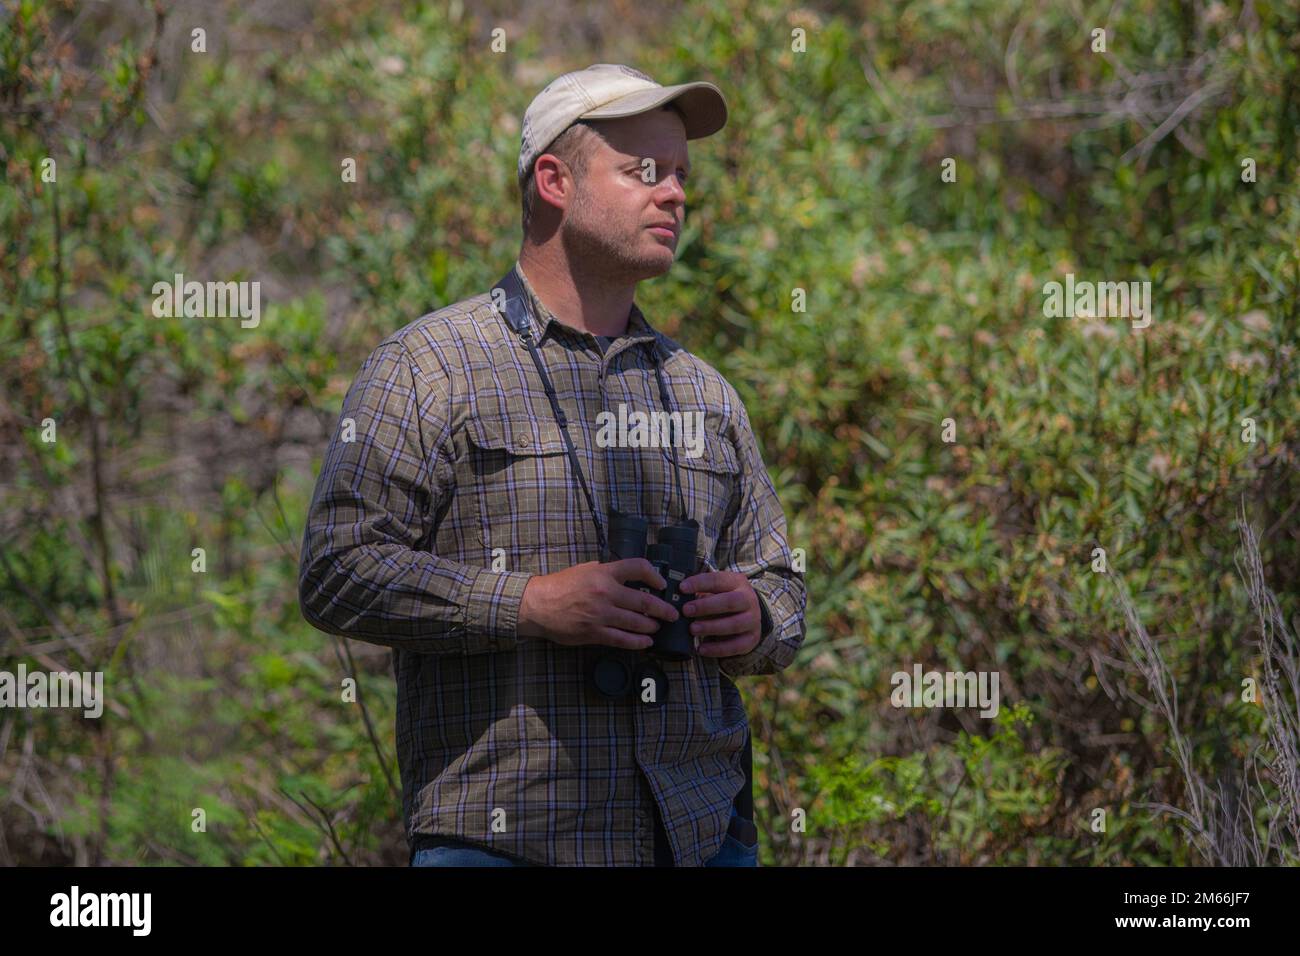 Nate Redetzke, a wildlife biologist with the Uplands Management Section, Environmental Security, Marine Corps Base Camp Pendleton, observes the wildlife on Camp Pendleton, California, April 7, 2022.  As a result of Environmental Security taking charge in protecting the environment and wildlife habitats, both the California gnatcatcher and kangaroo rat have been reduced from endangered to threatened species. Safeguarding endangered and threatened habitats also allows Camp Pendleton to maintain the same training environment and quality training opportunities for Marine Corps operational forces. Stock Photo